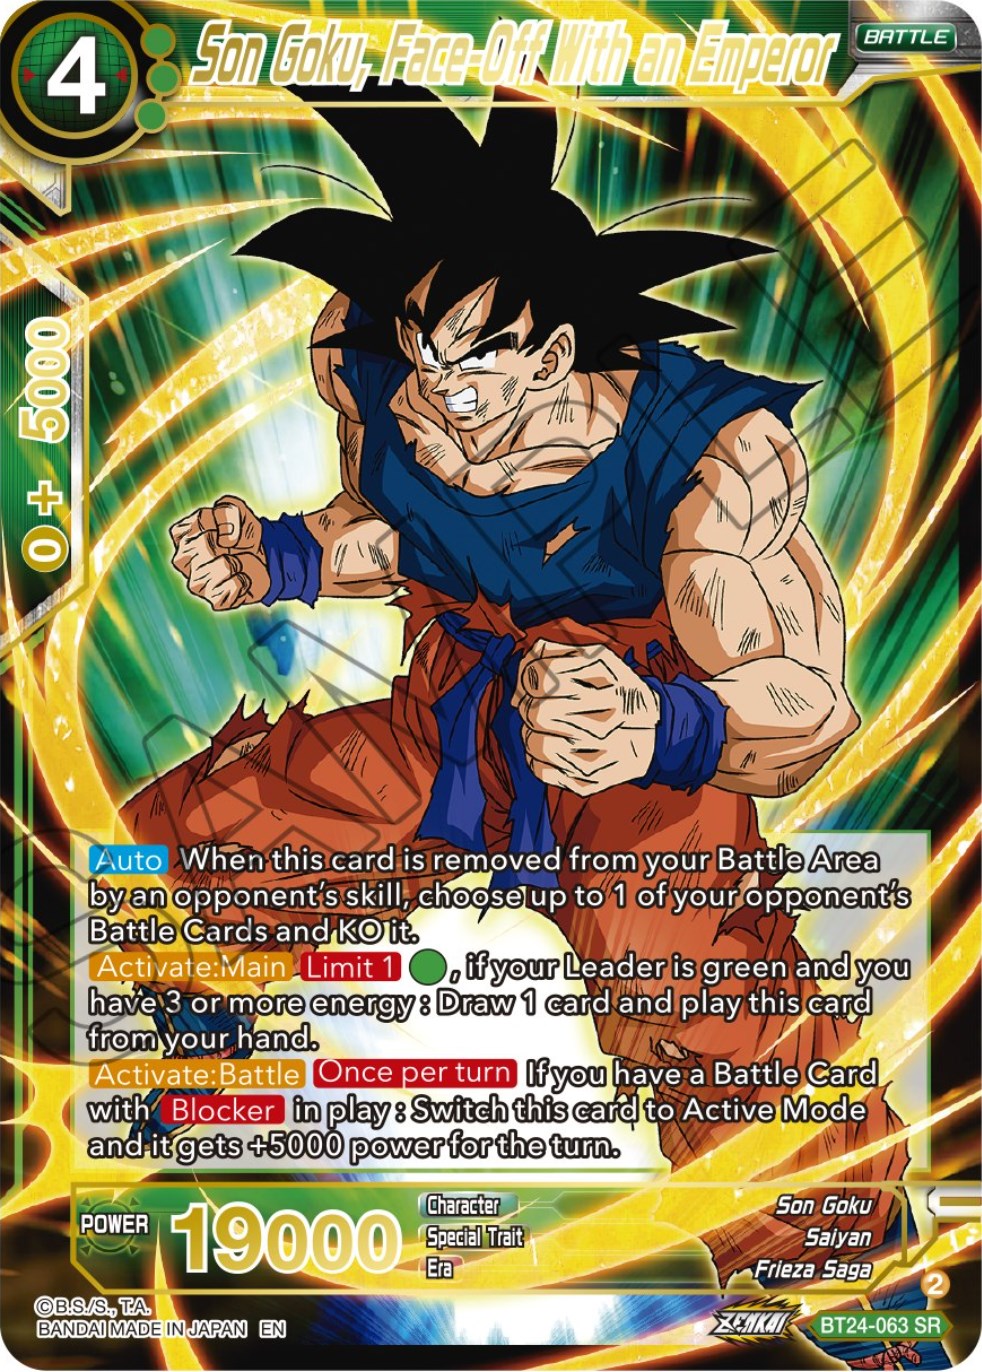 Son Goku, Face-Off With an Emperor (BT24-063) [Beyond Generations] | Devastation Store